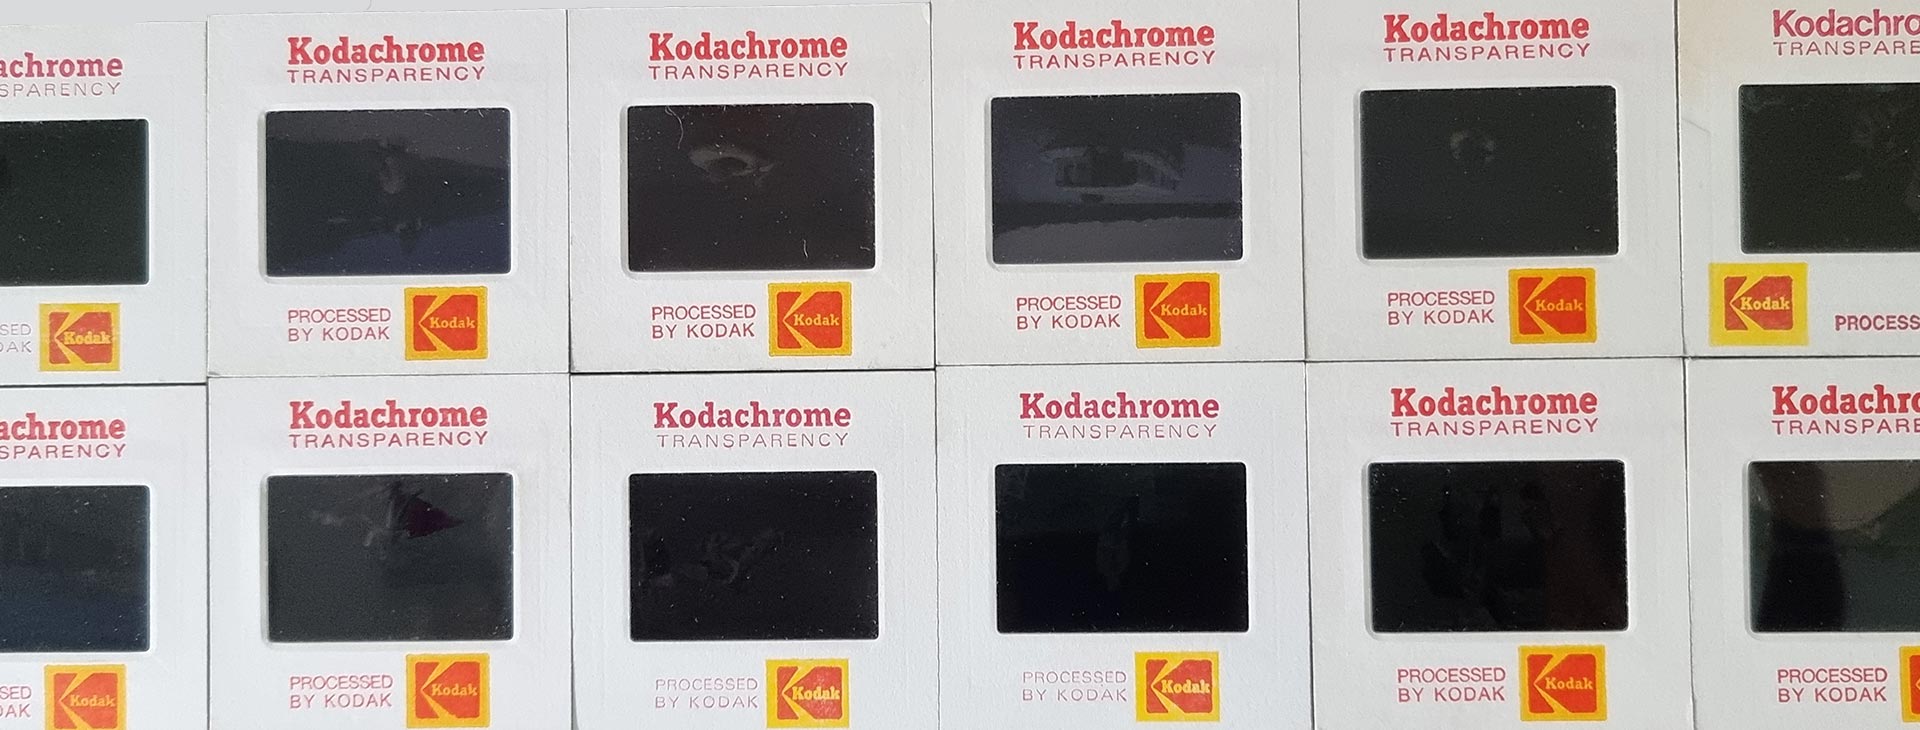 Kodachrome Transparency Slides Ready For Scanning